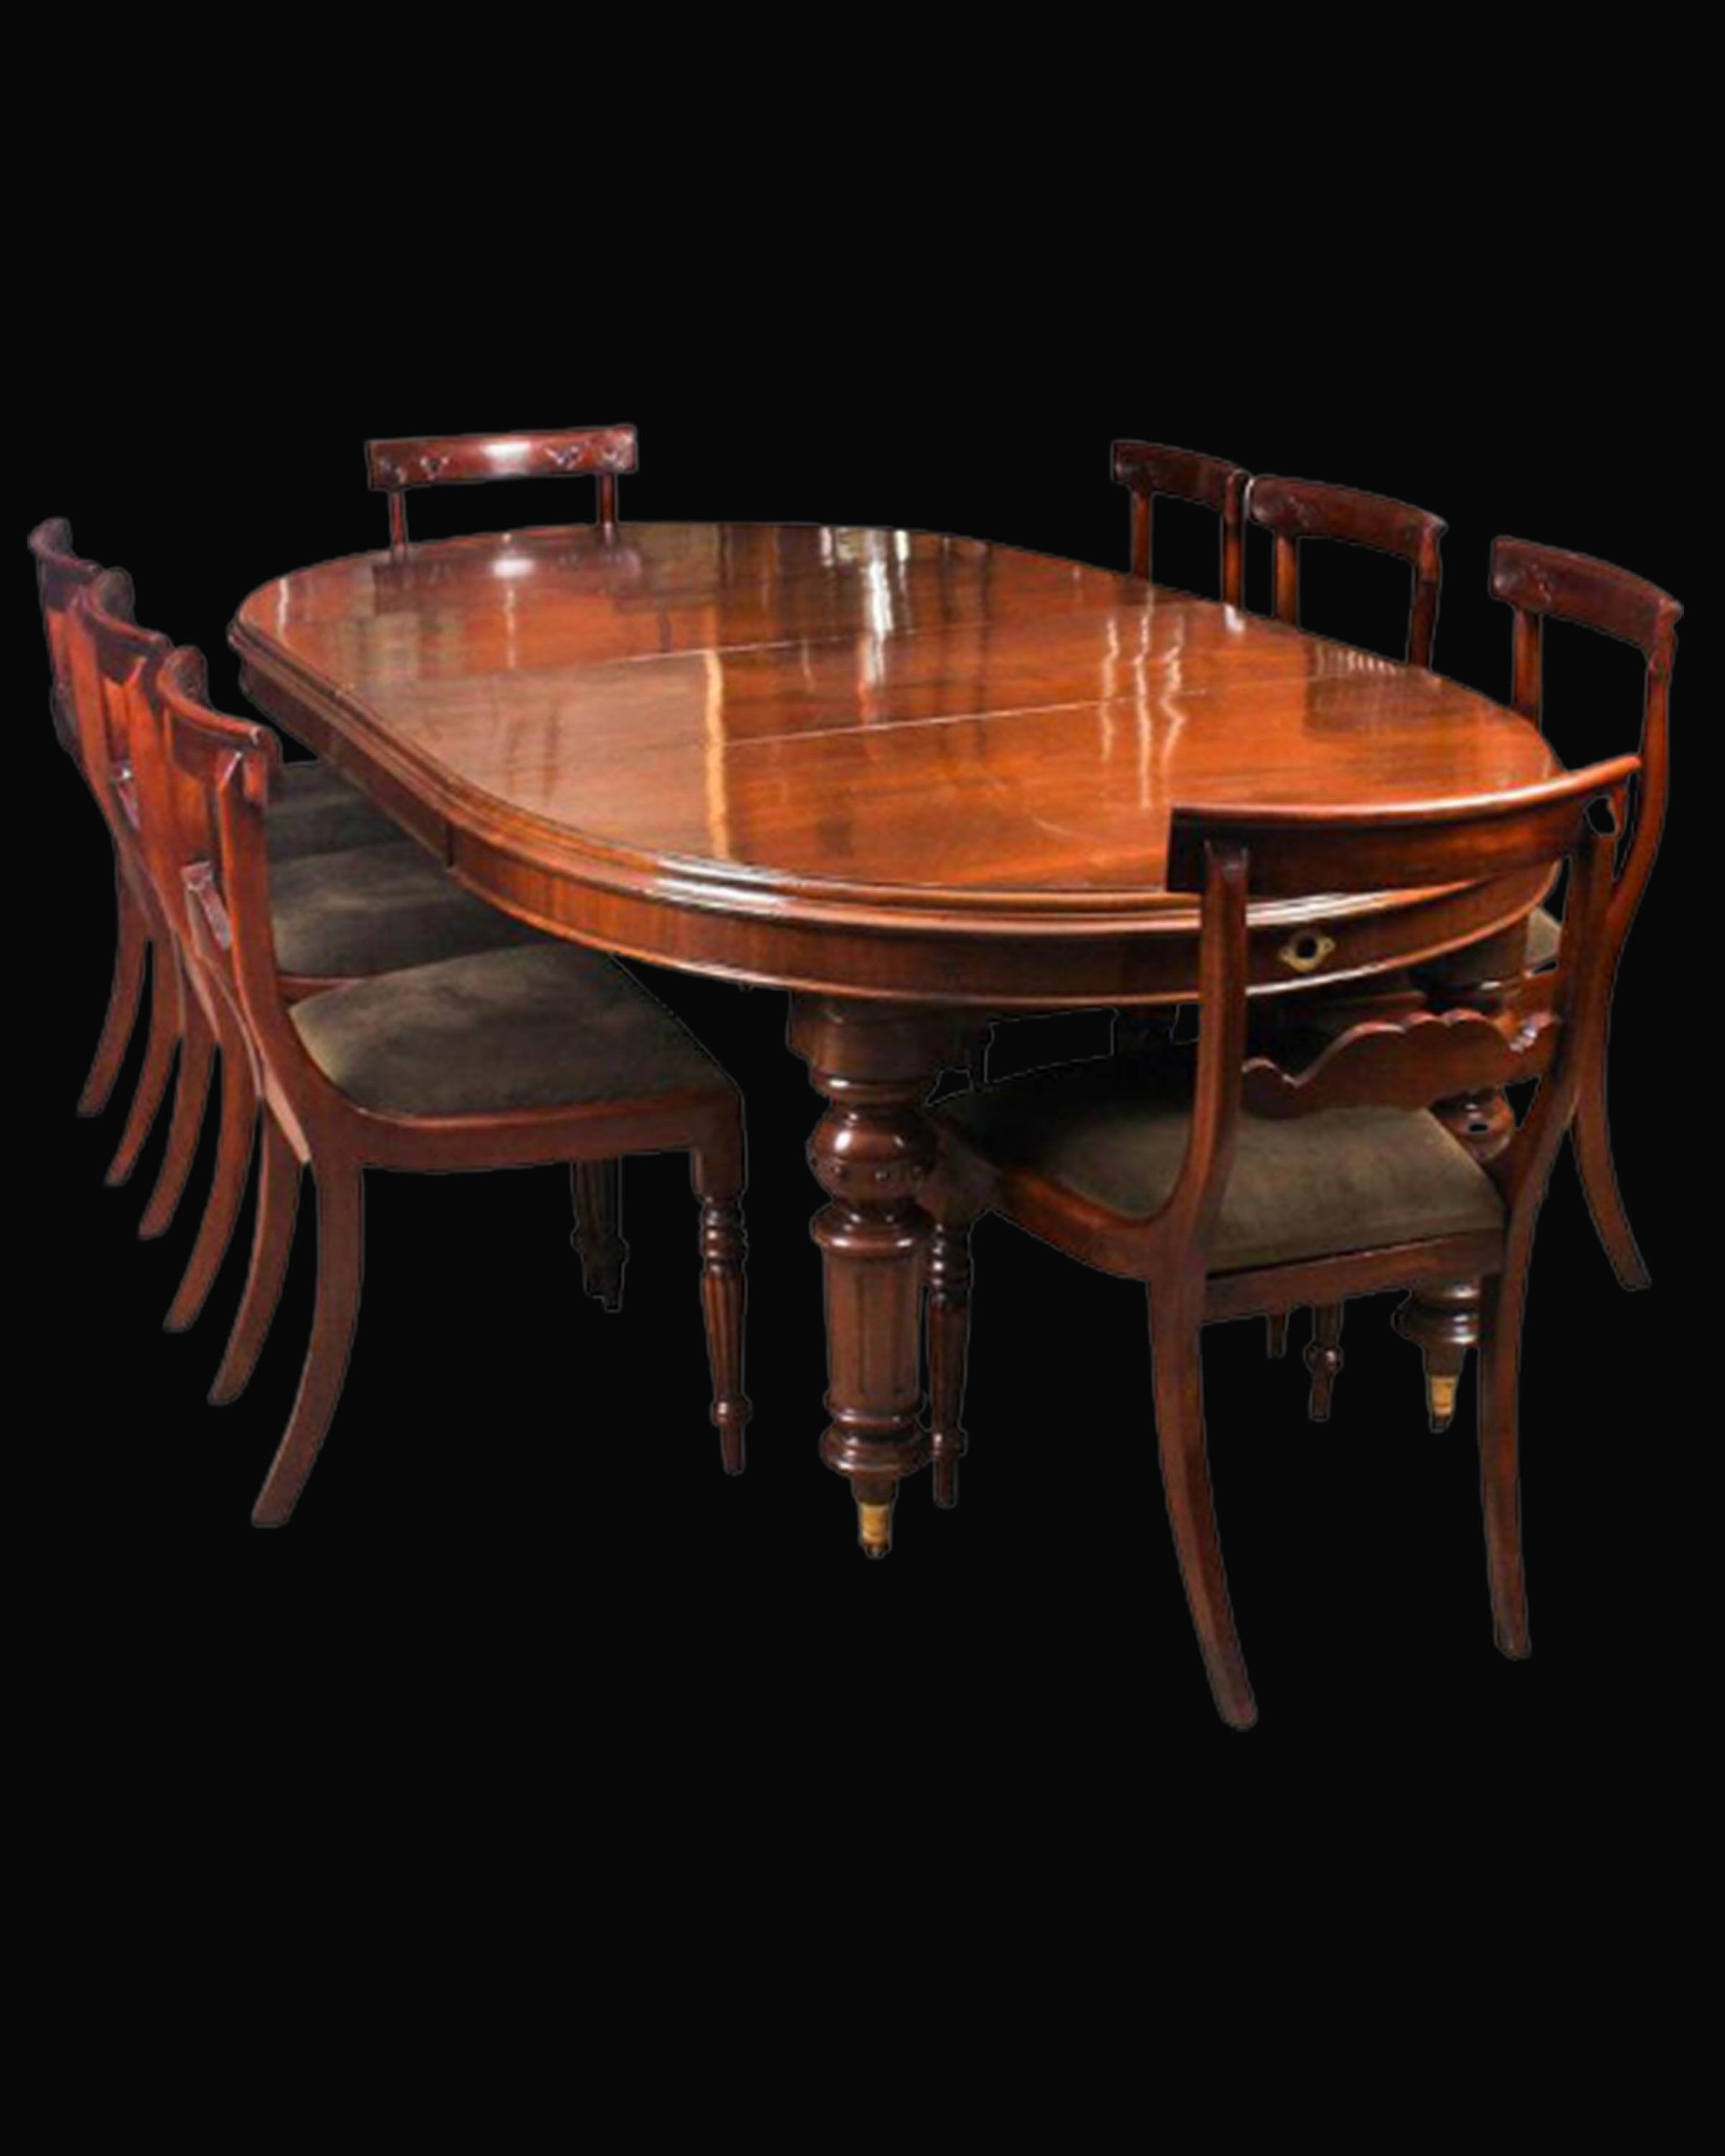 Luxury Wooden Dining Table